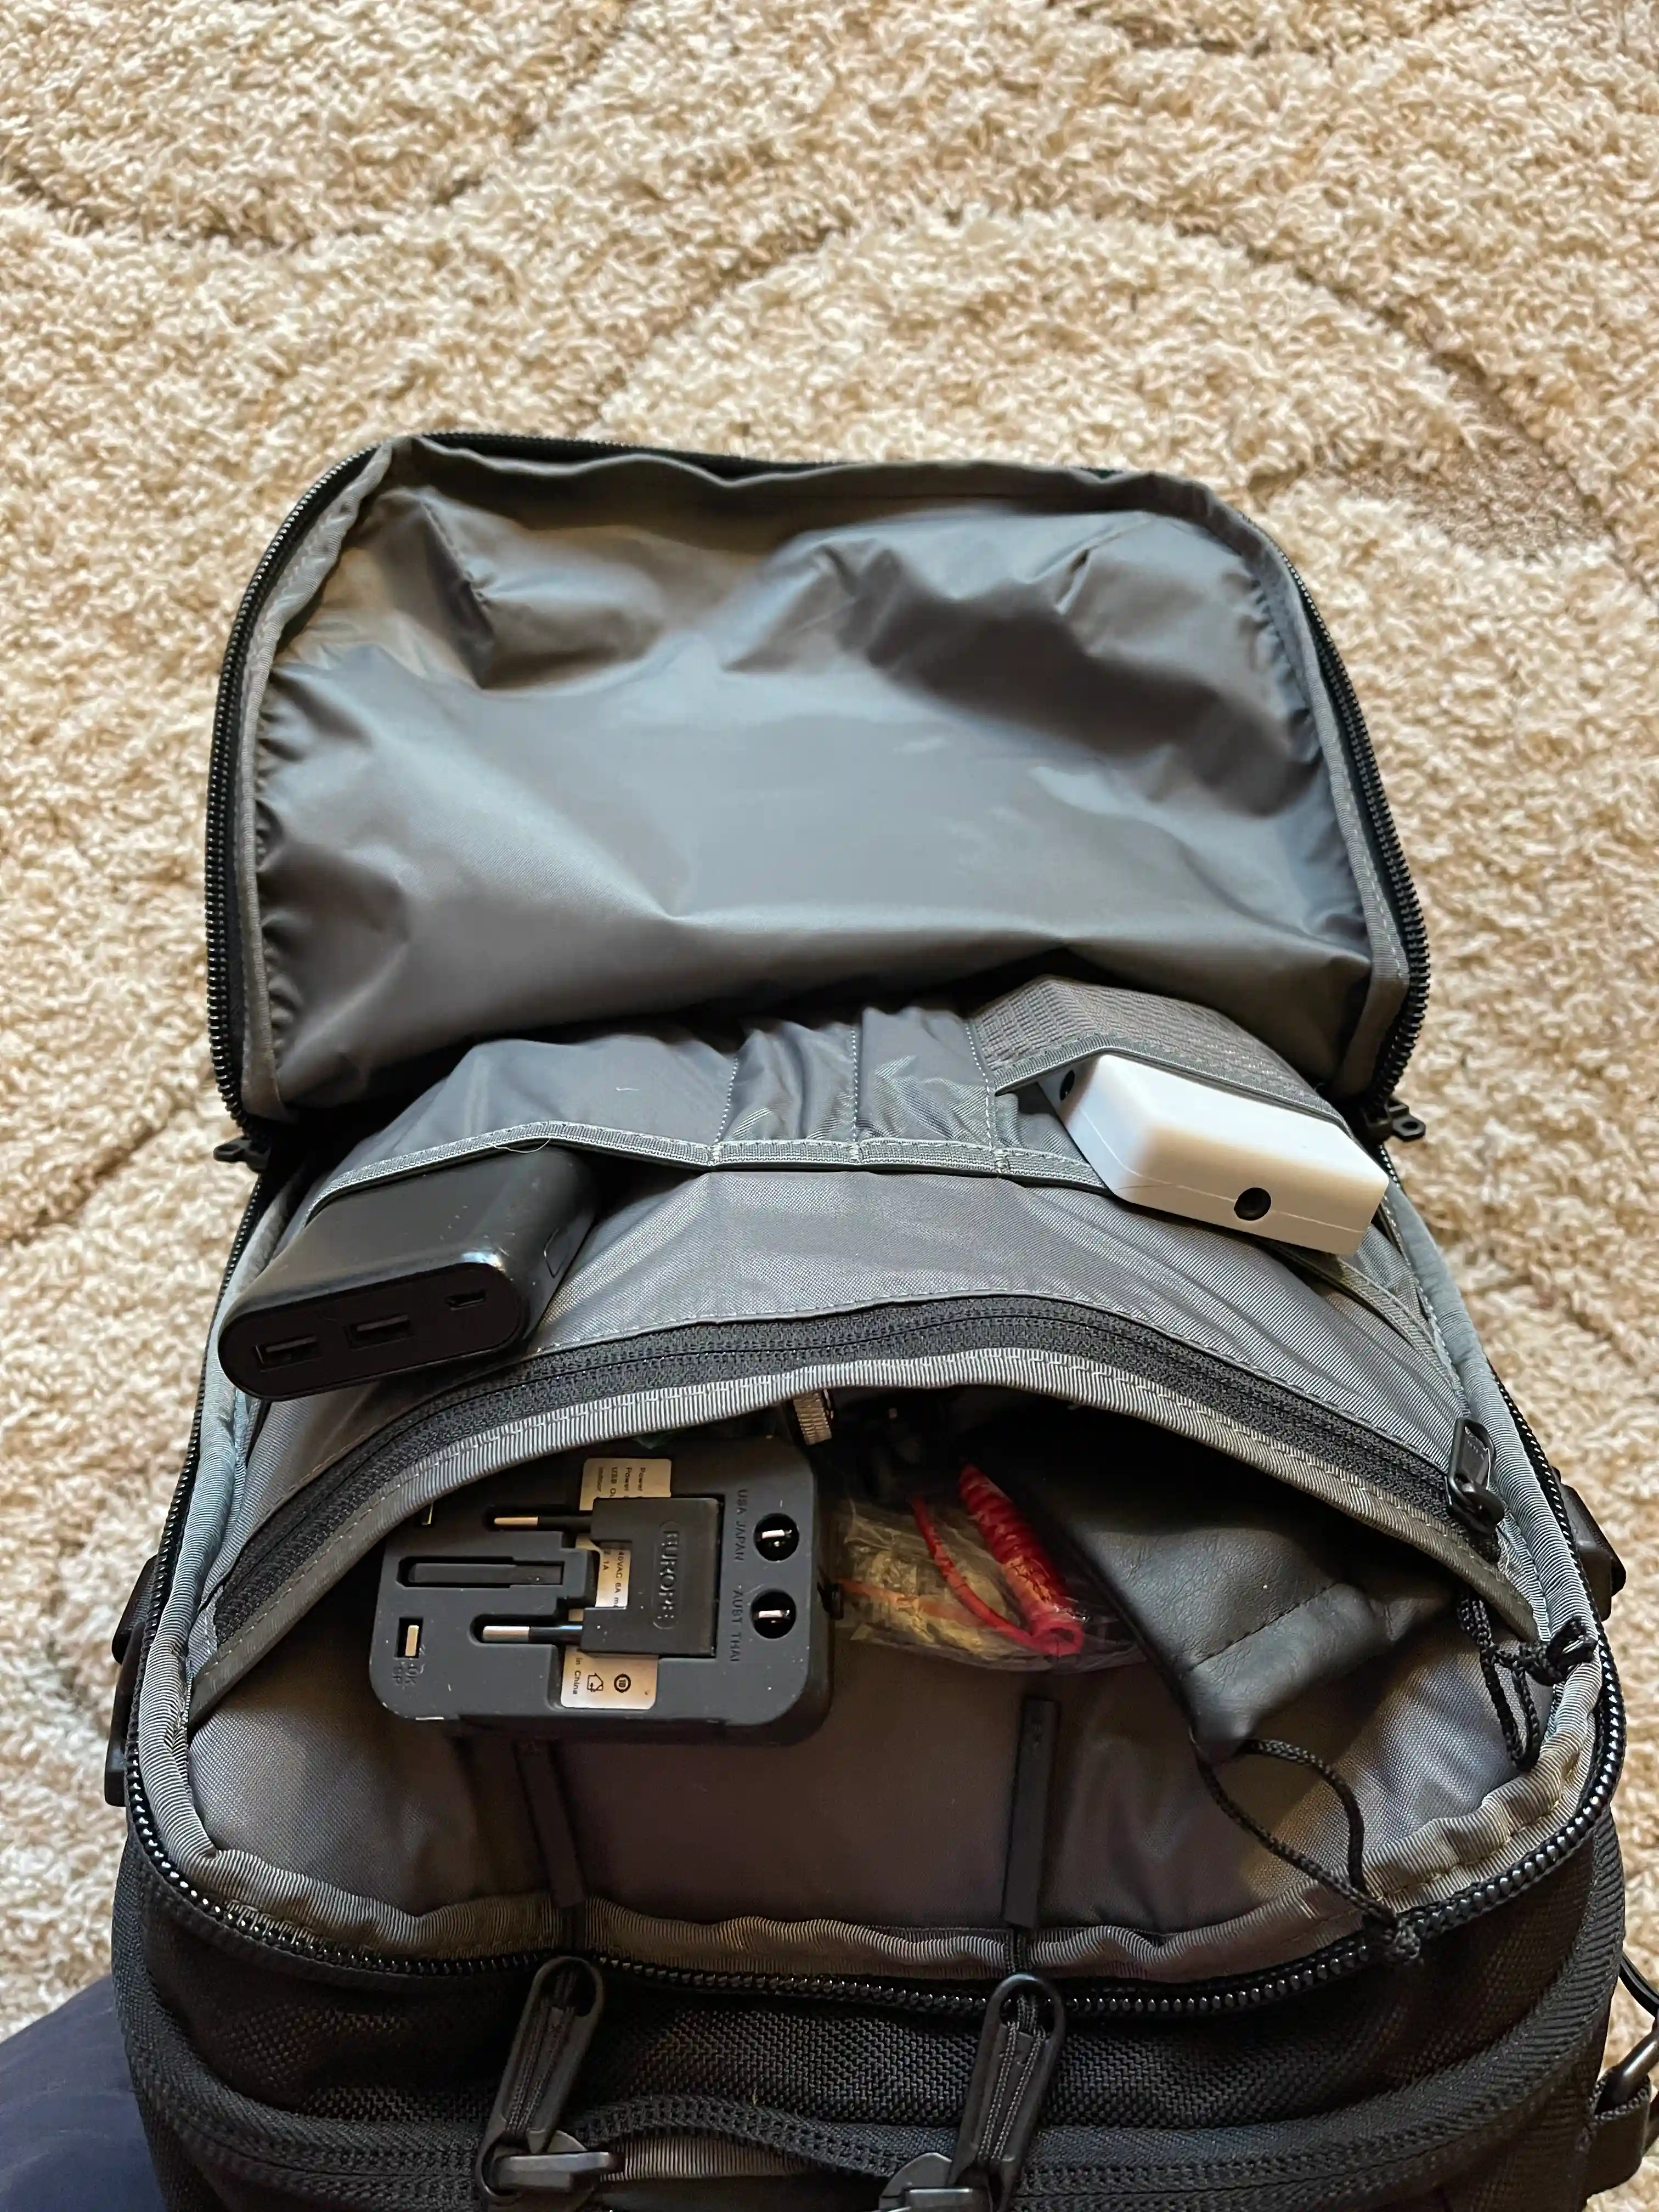 Aer Travel Pack 2 Review: A bit over-hyped? - The Daily Grog